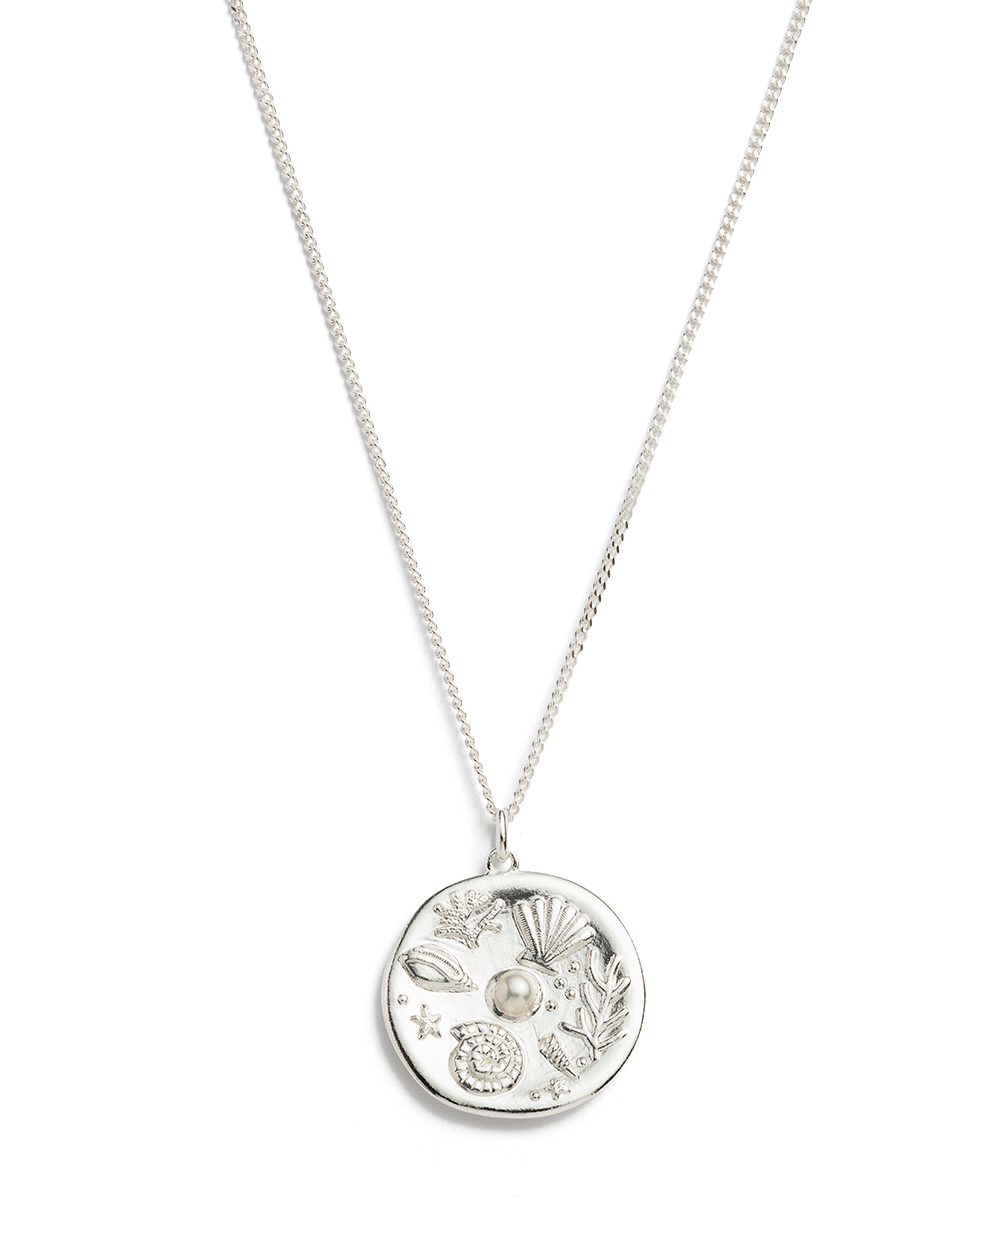 BY THE SEA COIN NECKLACE (STERLING SILVER) - IMAGE 1